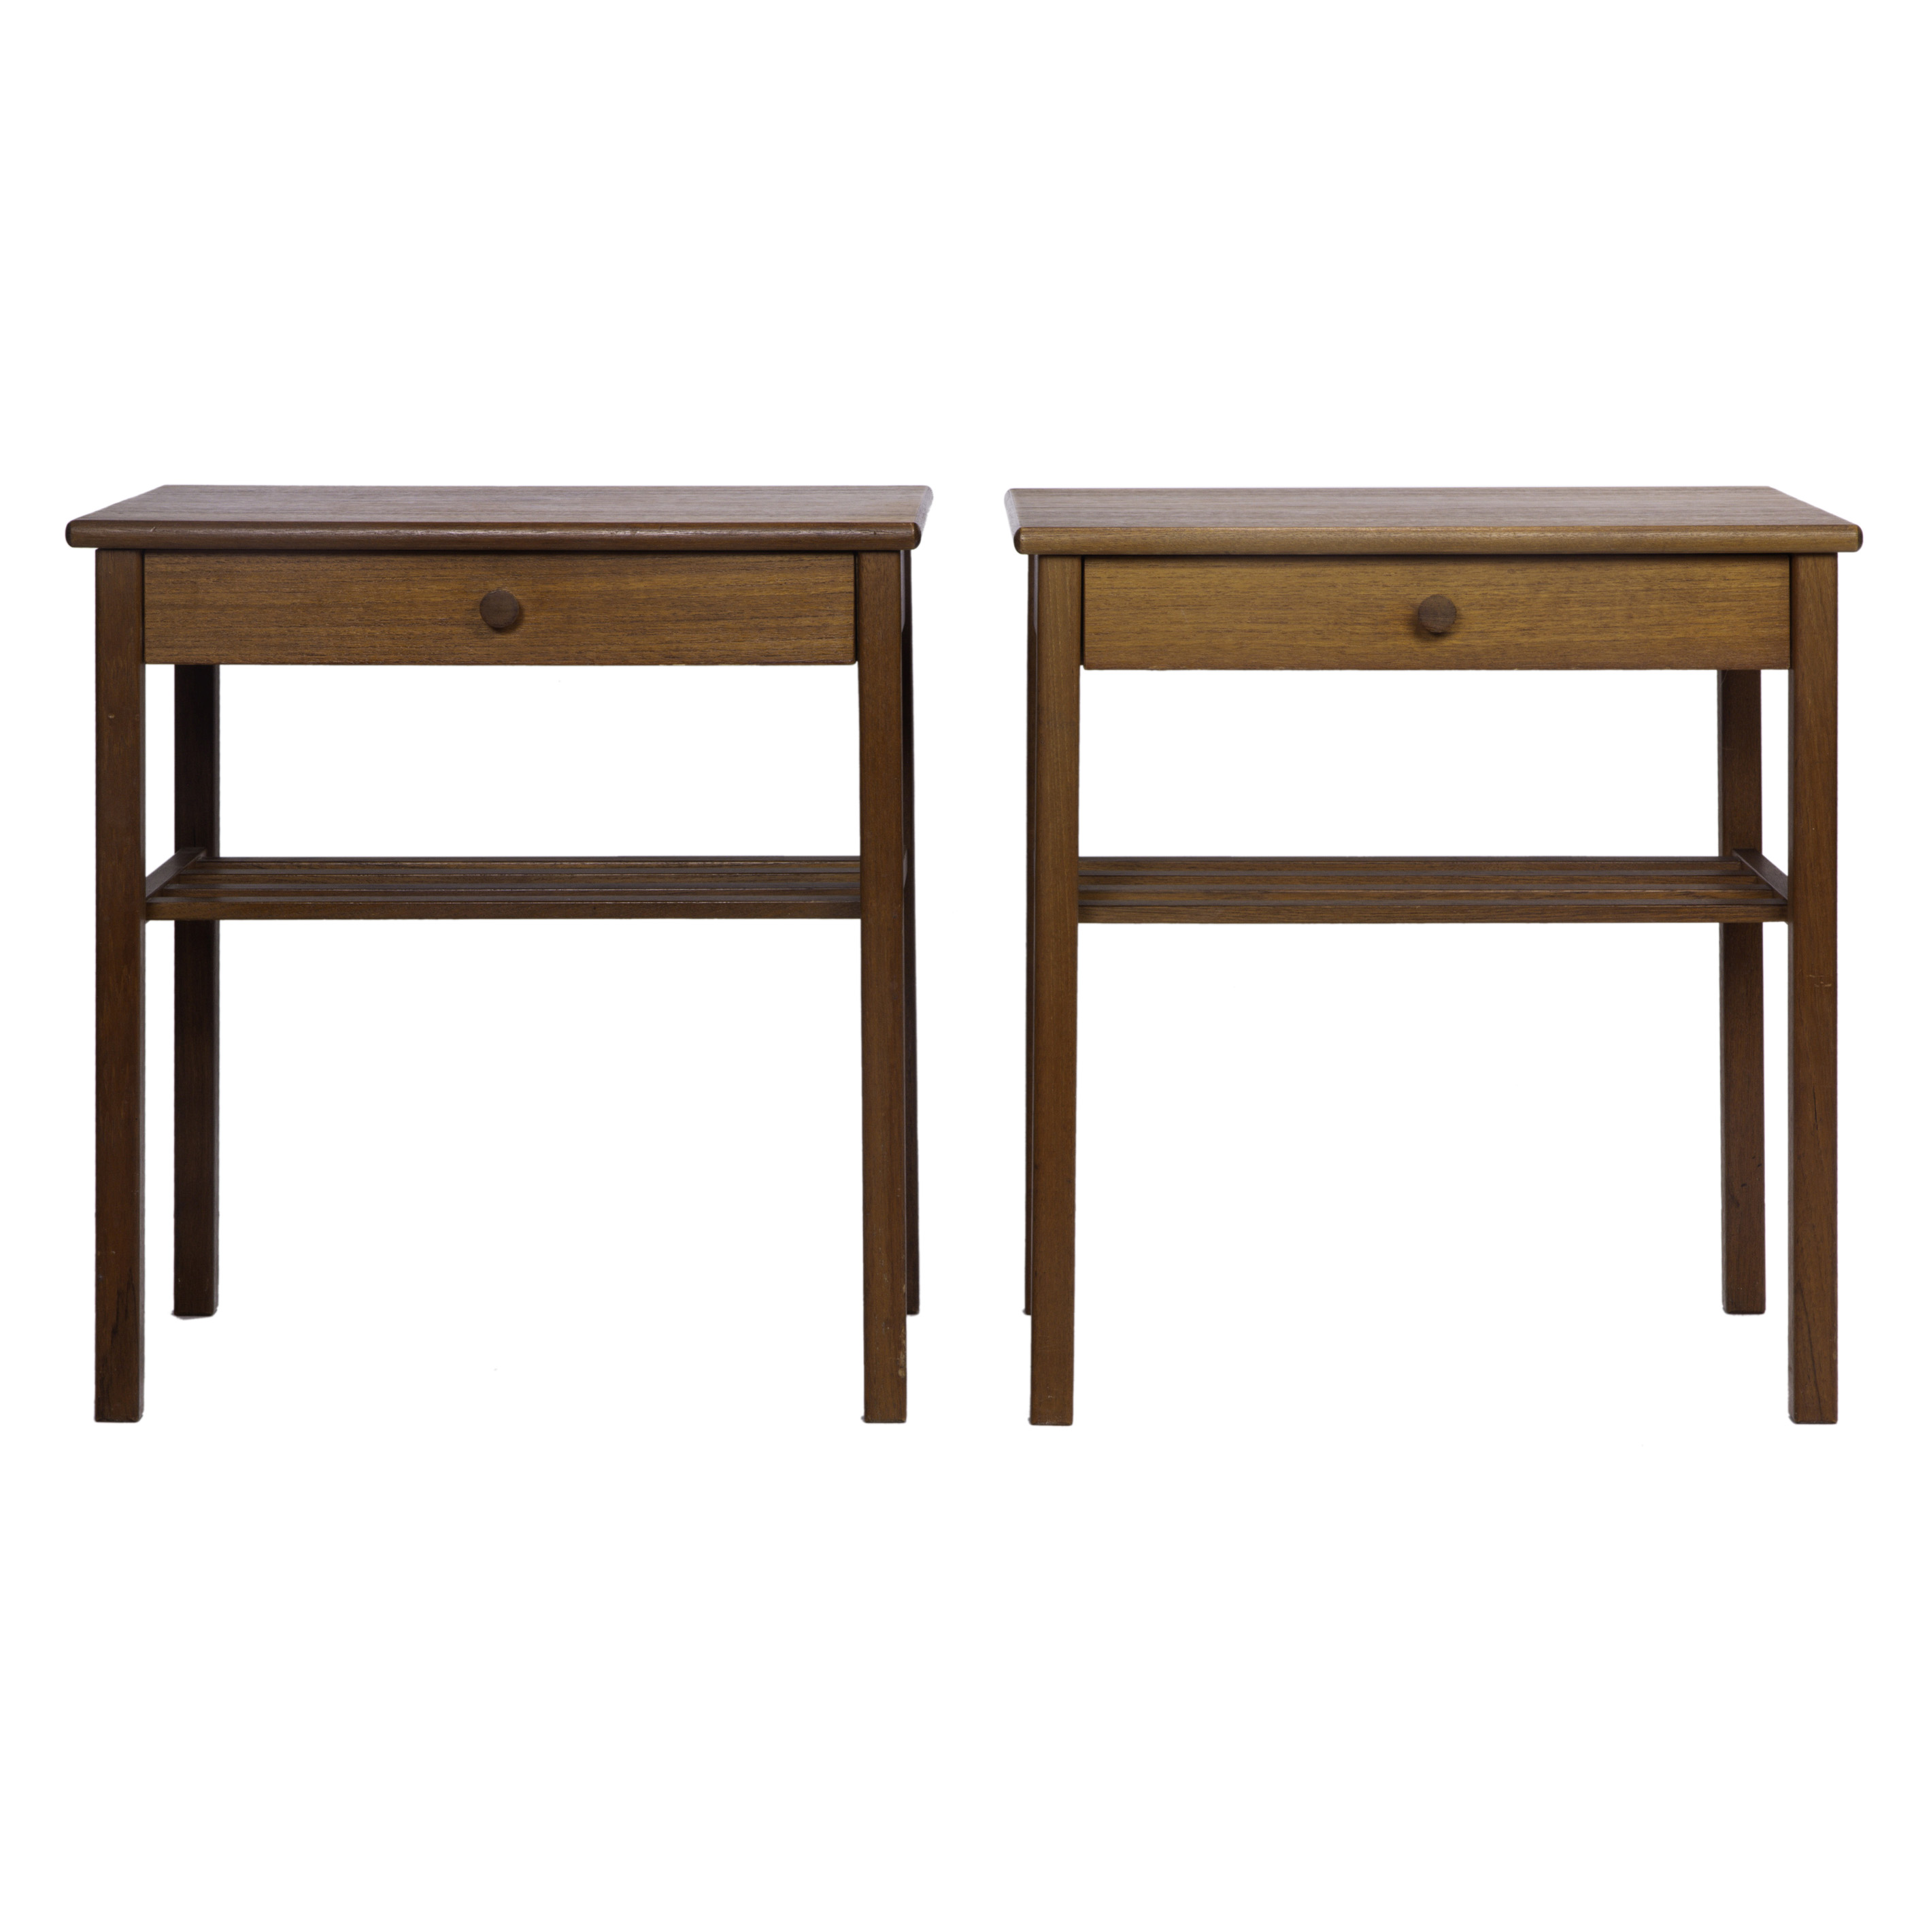 A PAIR OF DANISH MODERN STYLE OCCASIONAL 3a48d0